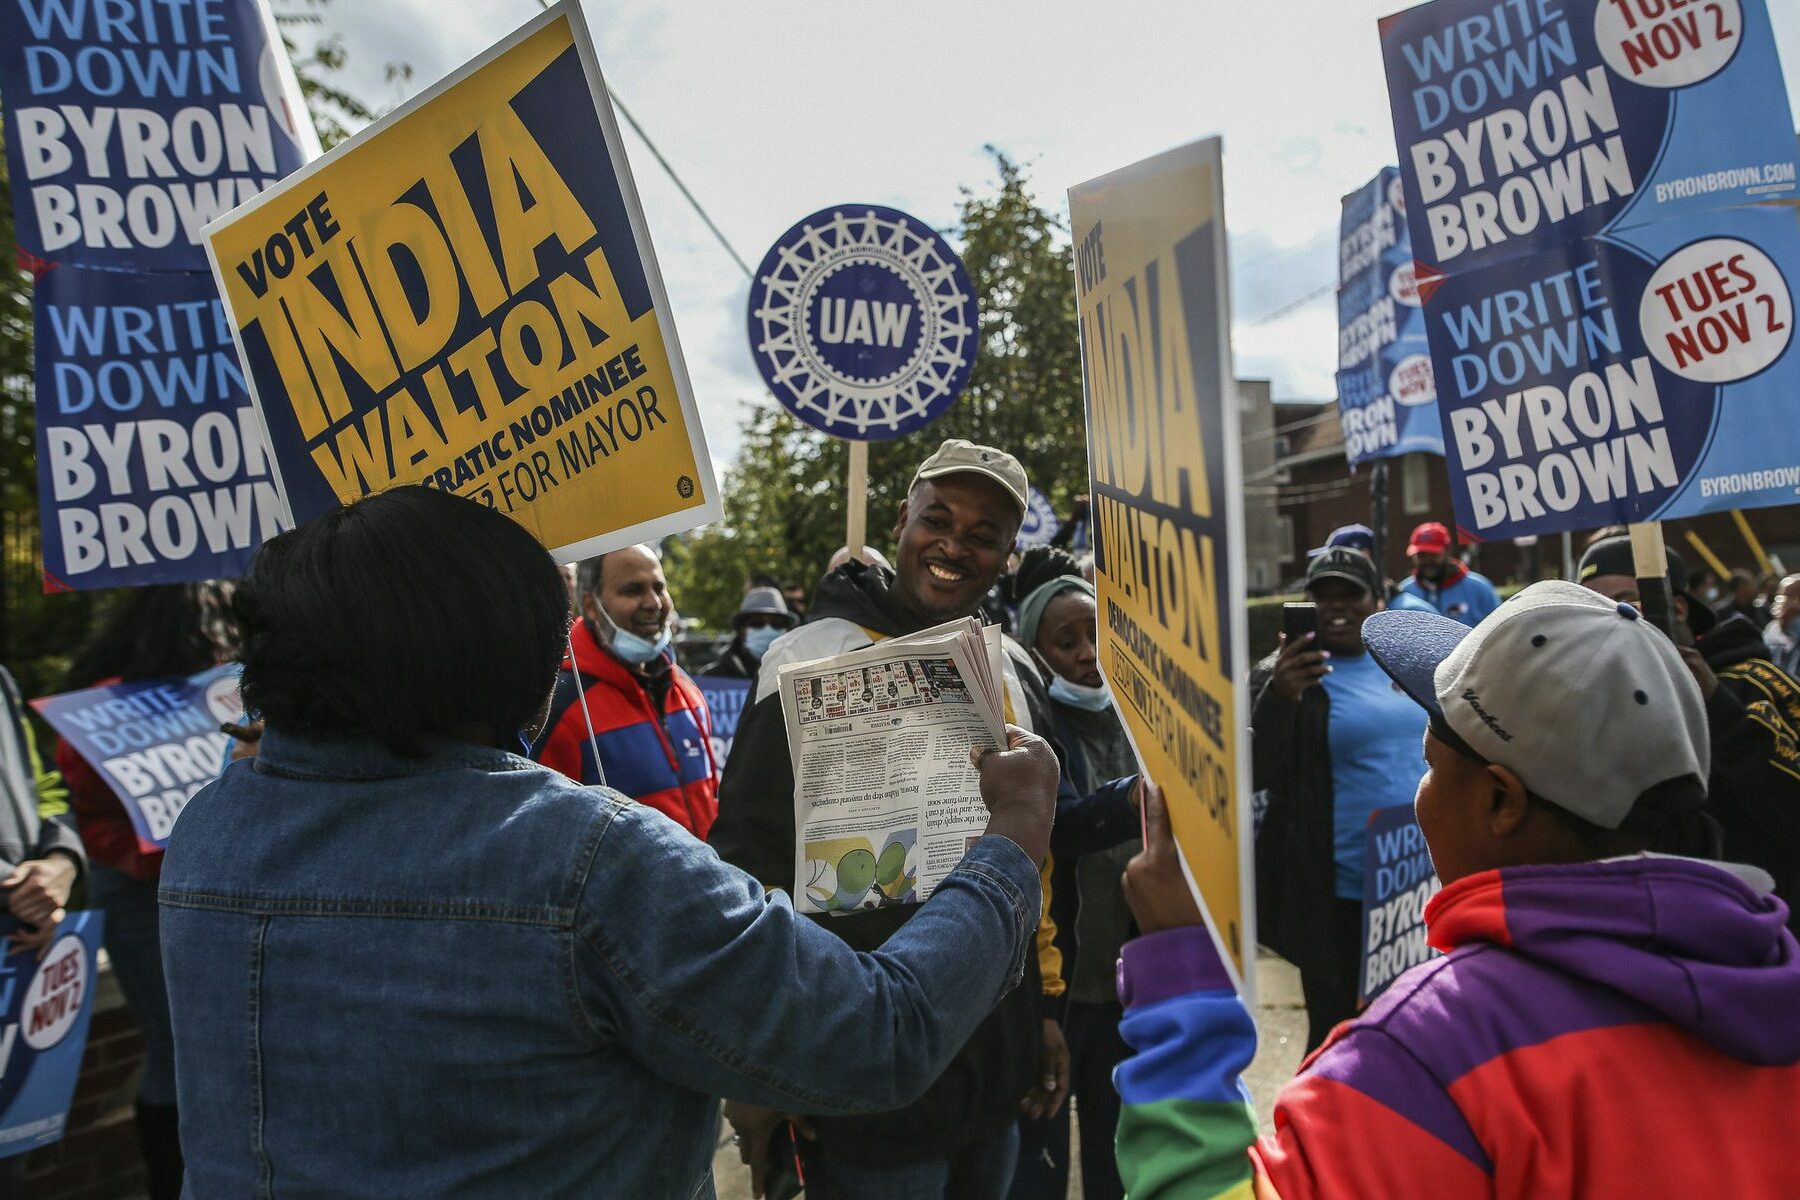 People hold signs for India Walton and Byron Brown in Buffalo